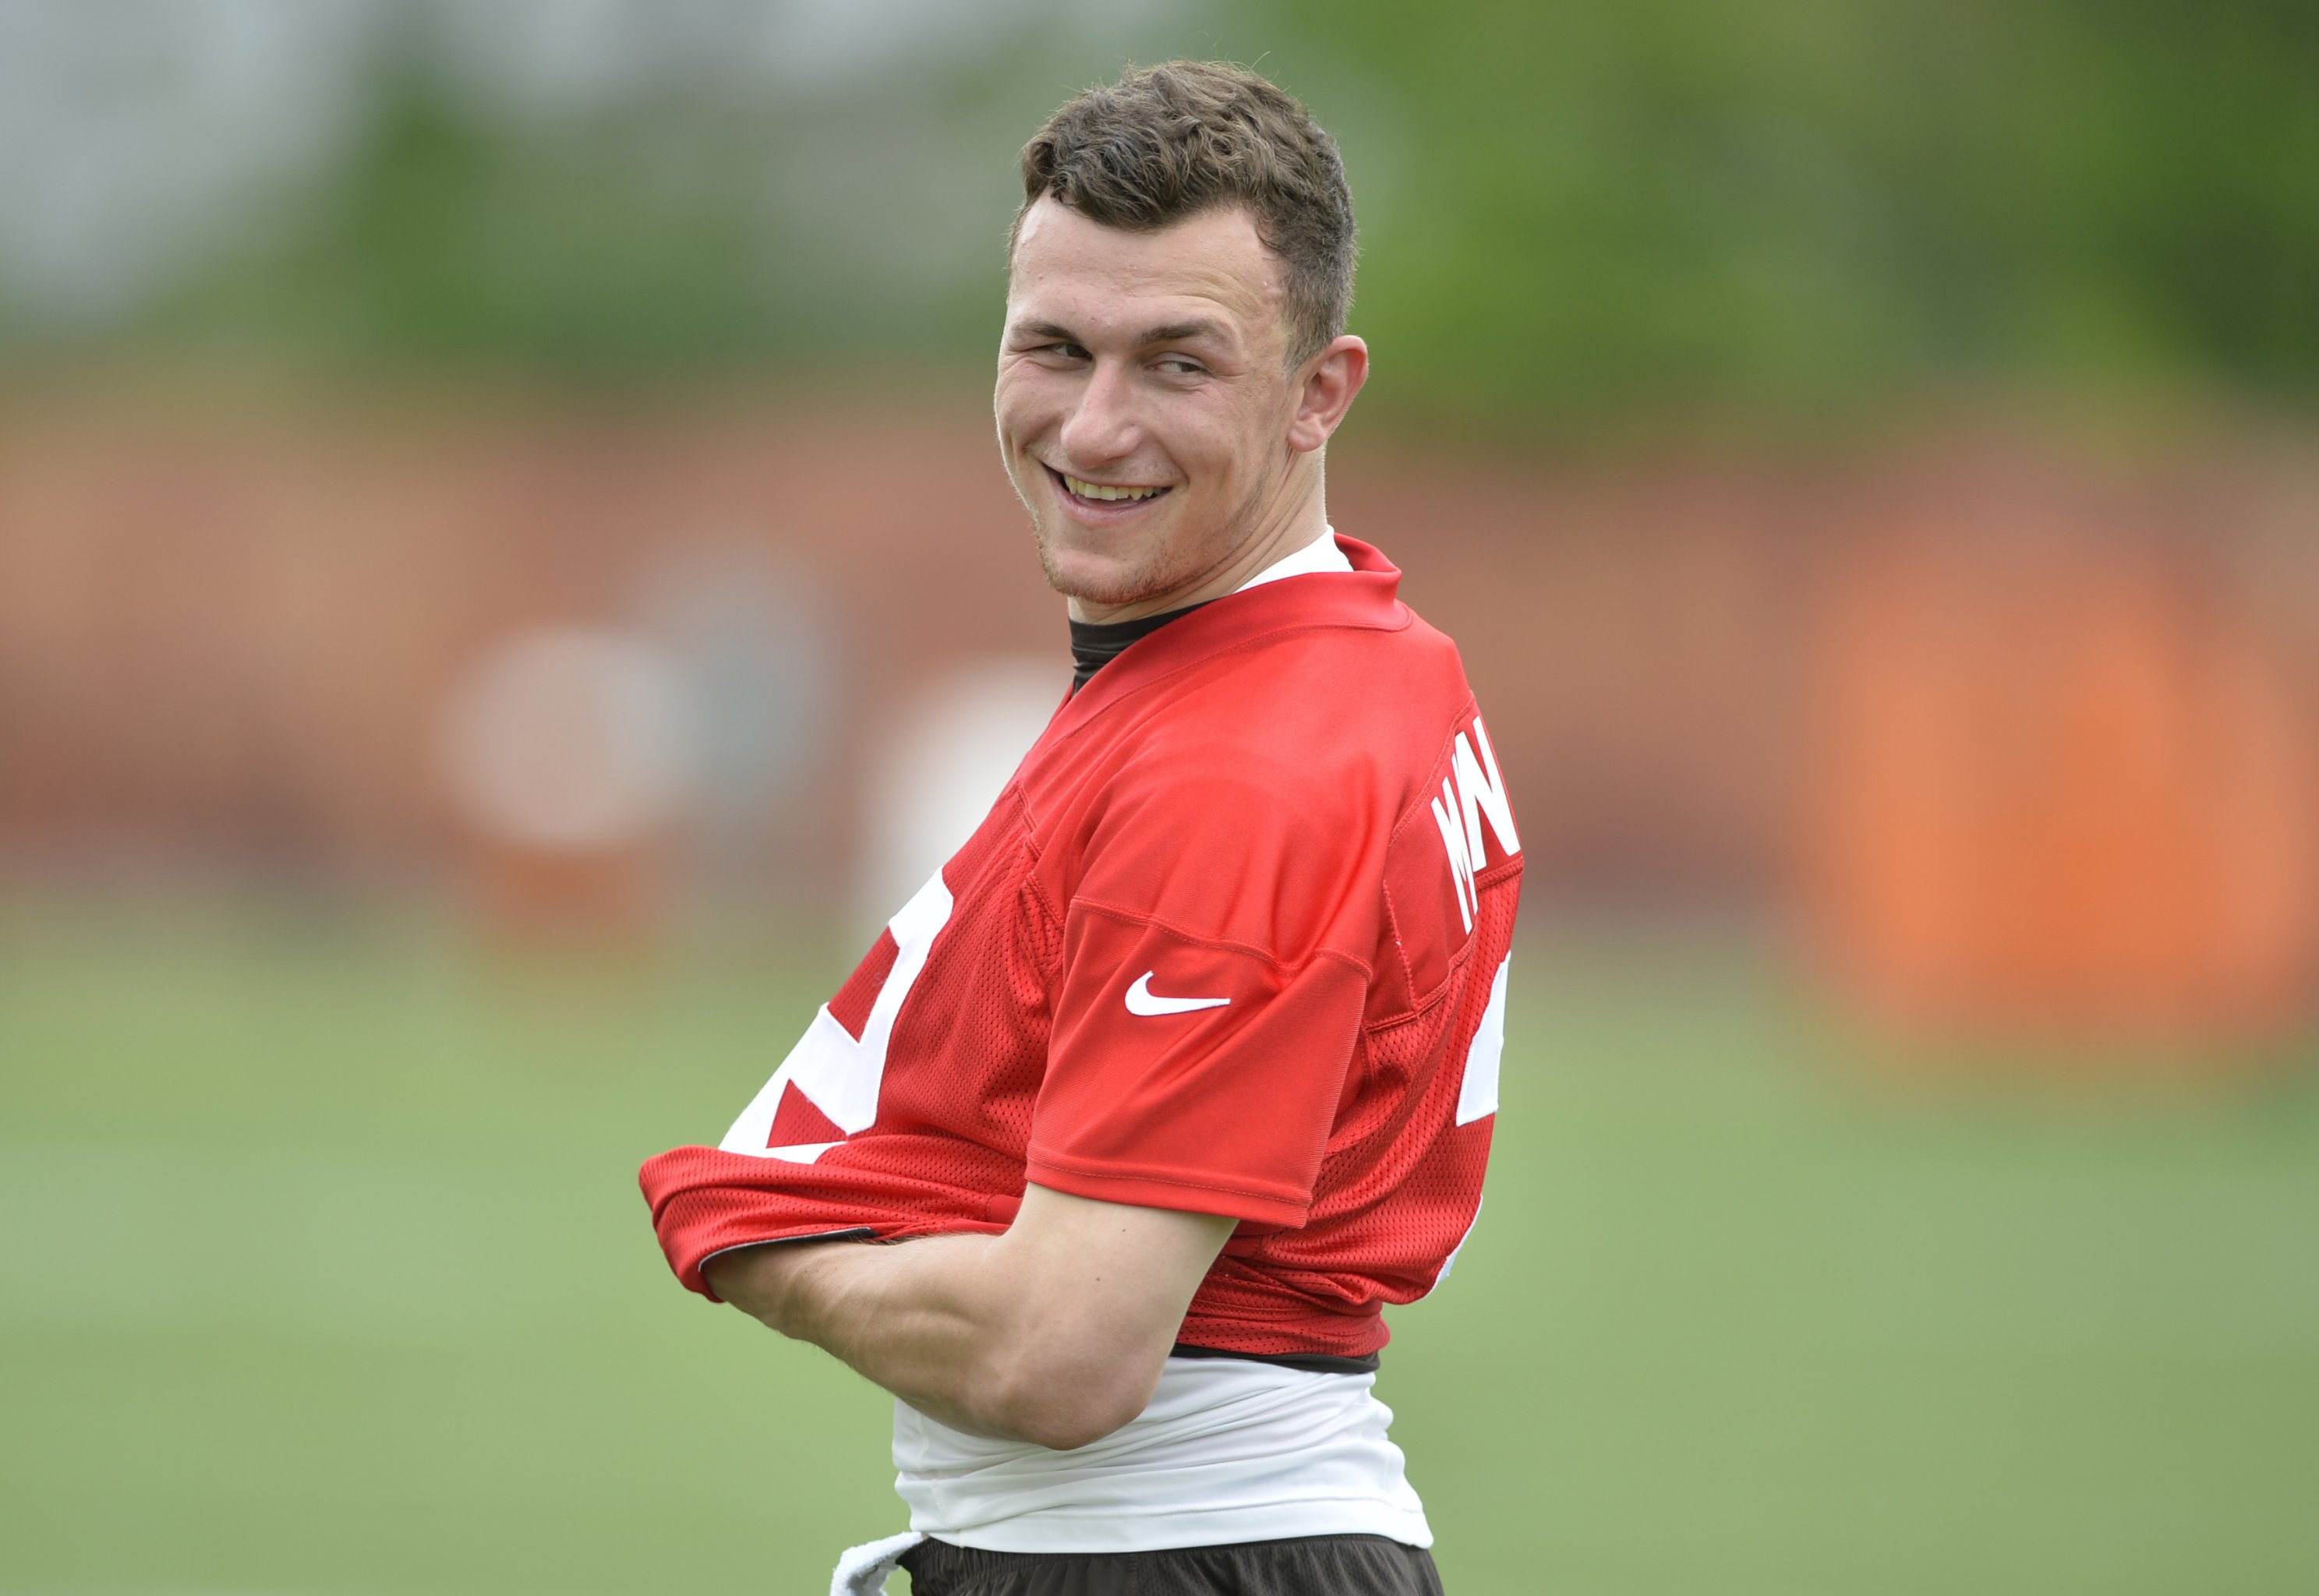 Johnny Manziel tops the list of players we'd like to see on Dallas